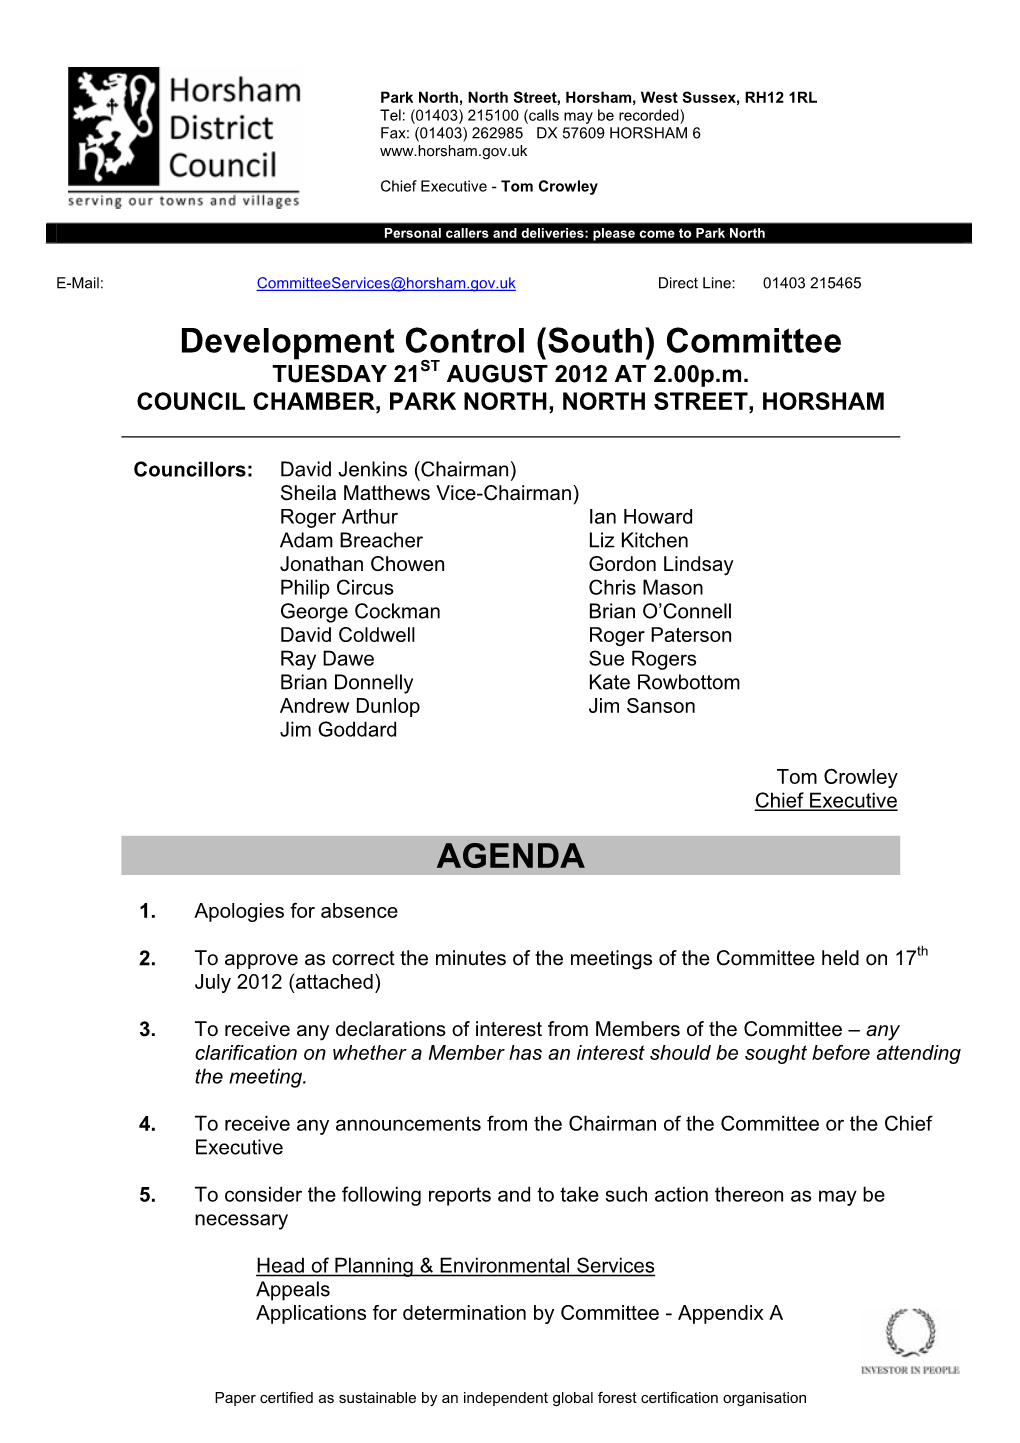 Development Control (South) Committee TUESDAY 21ST AUGUST 2012 at 2.00P.M